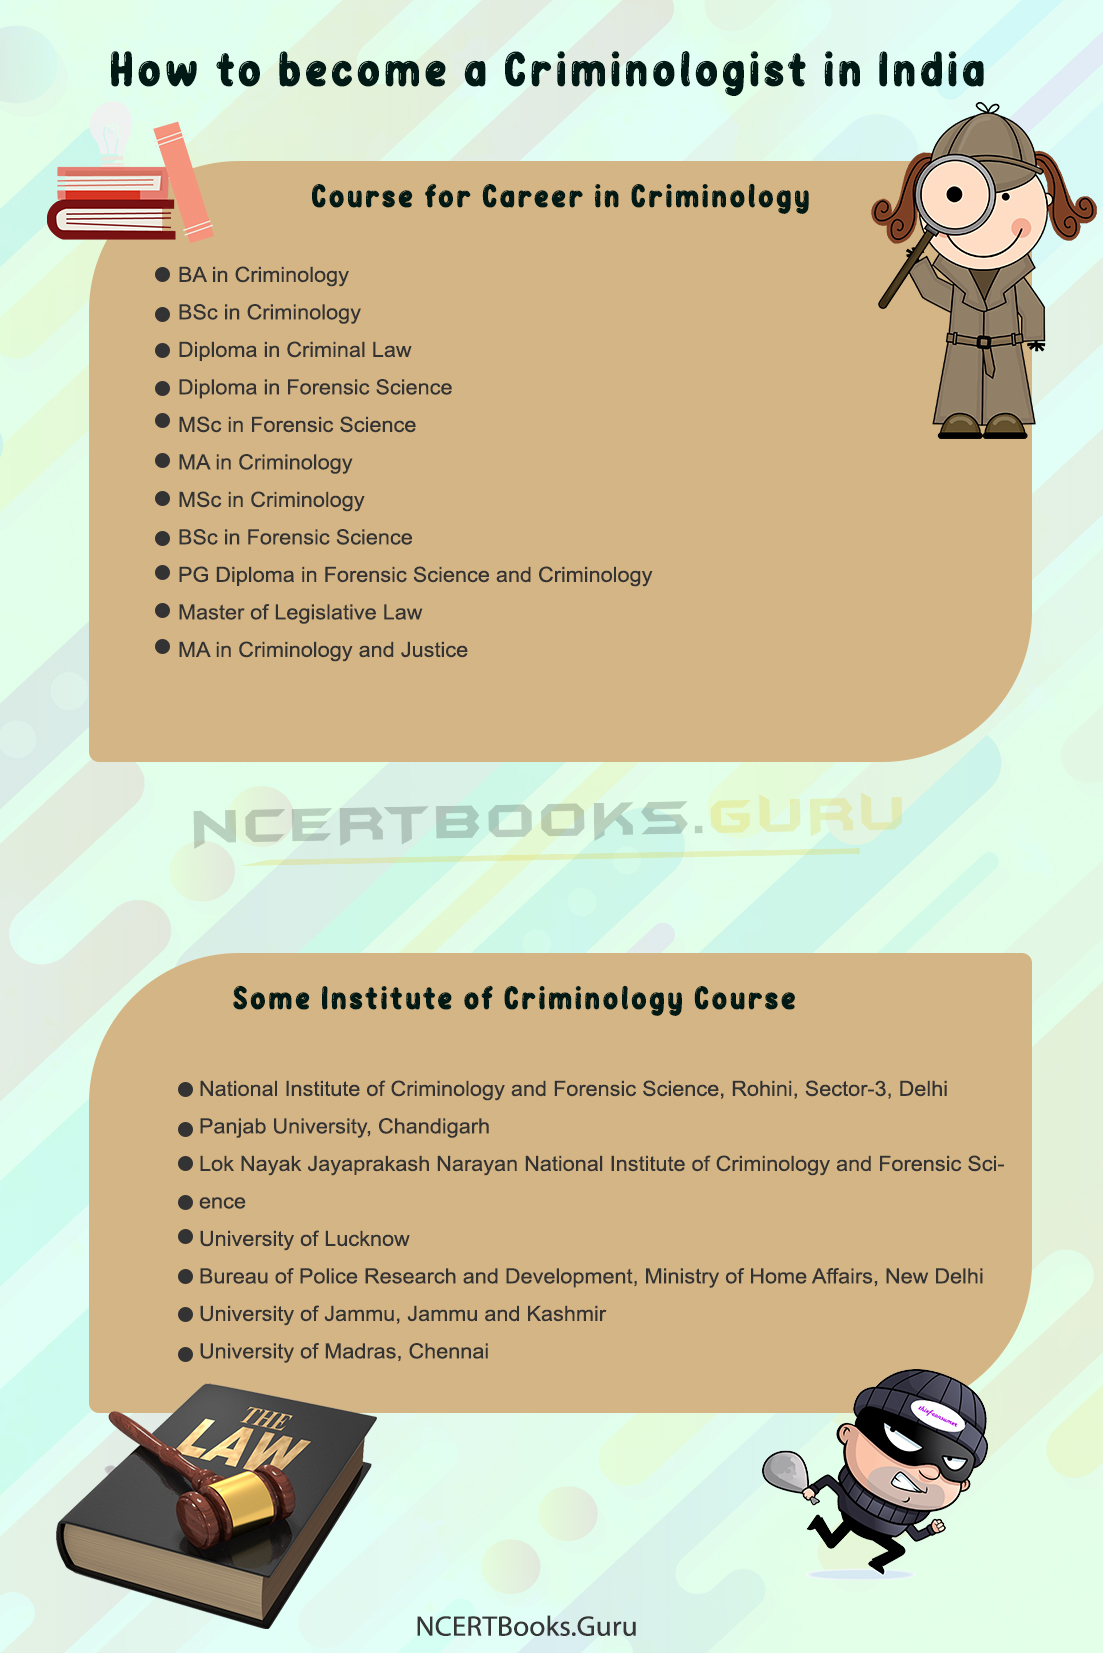 How to become a Criminologist in India